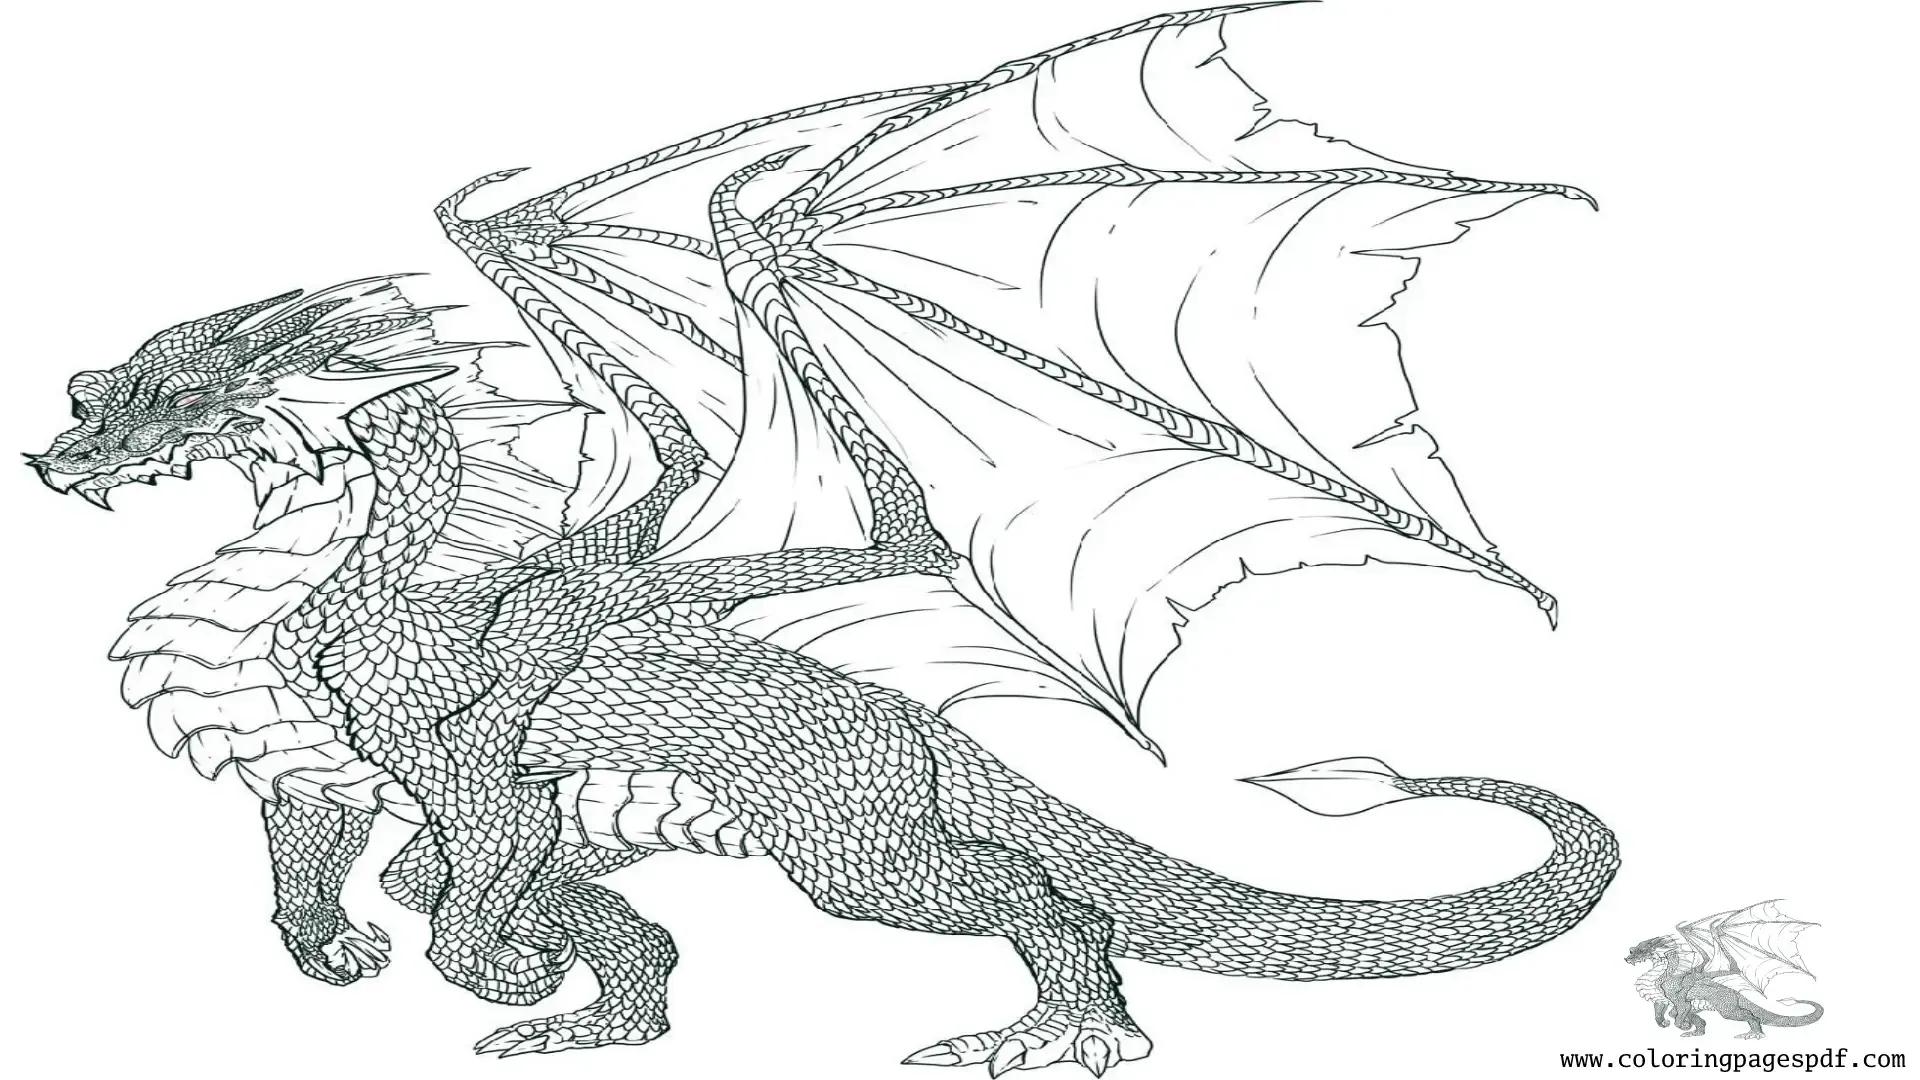 Coloring Page Of A Dragon Standing On Two Legs